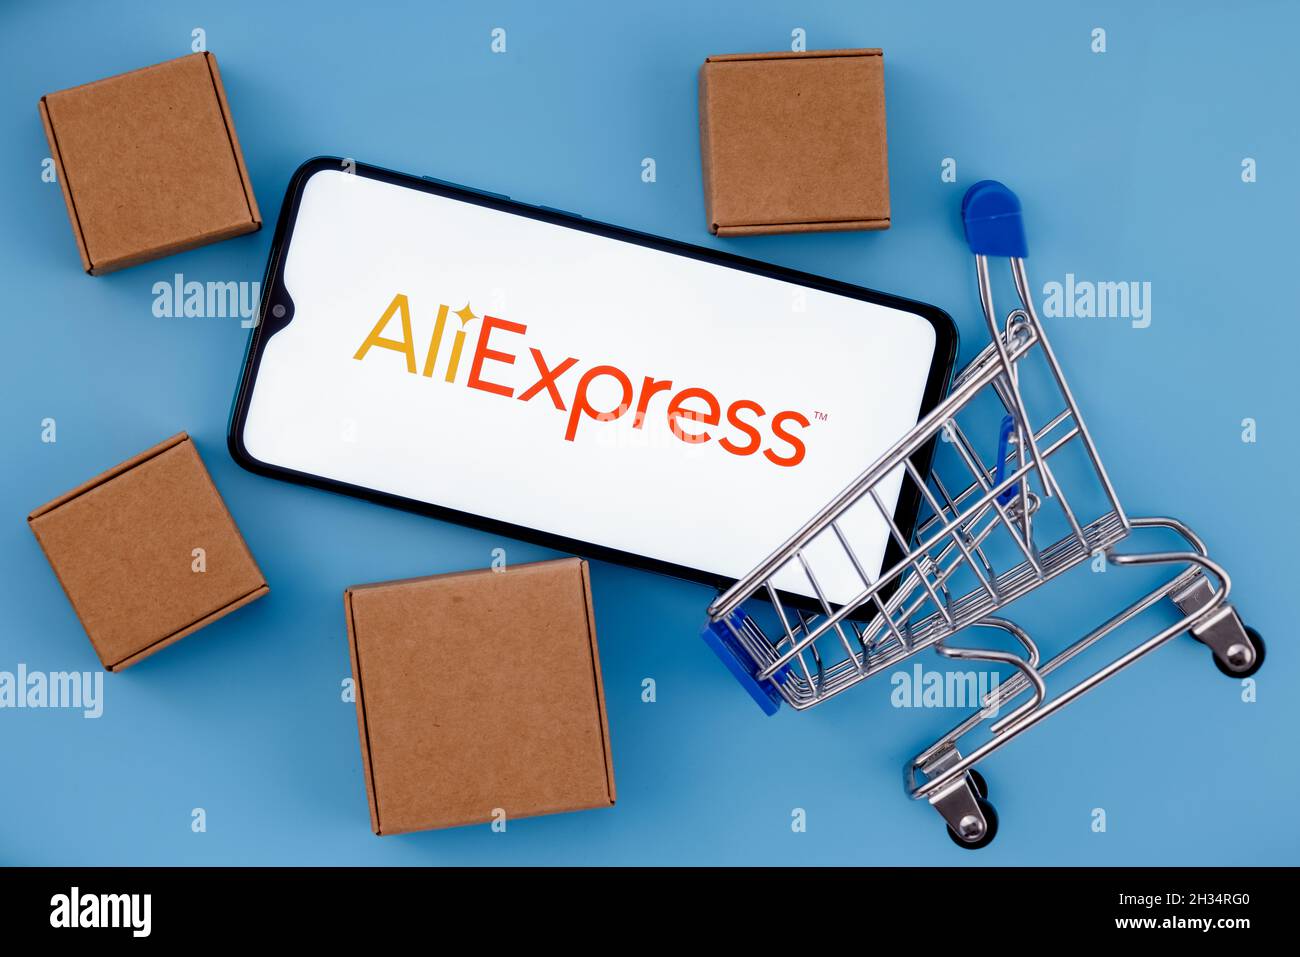 AliExpress is an Chinese online retail service. Smartphone with AliExpress  logo on the screen, shopping cart and parcels Stock Photo - Alamy